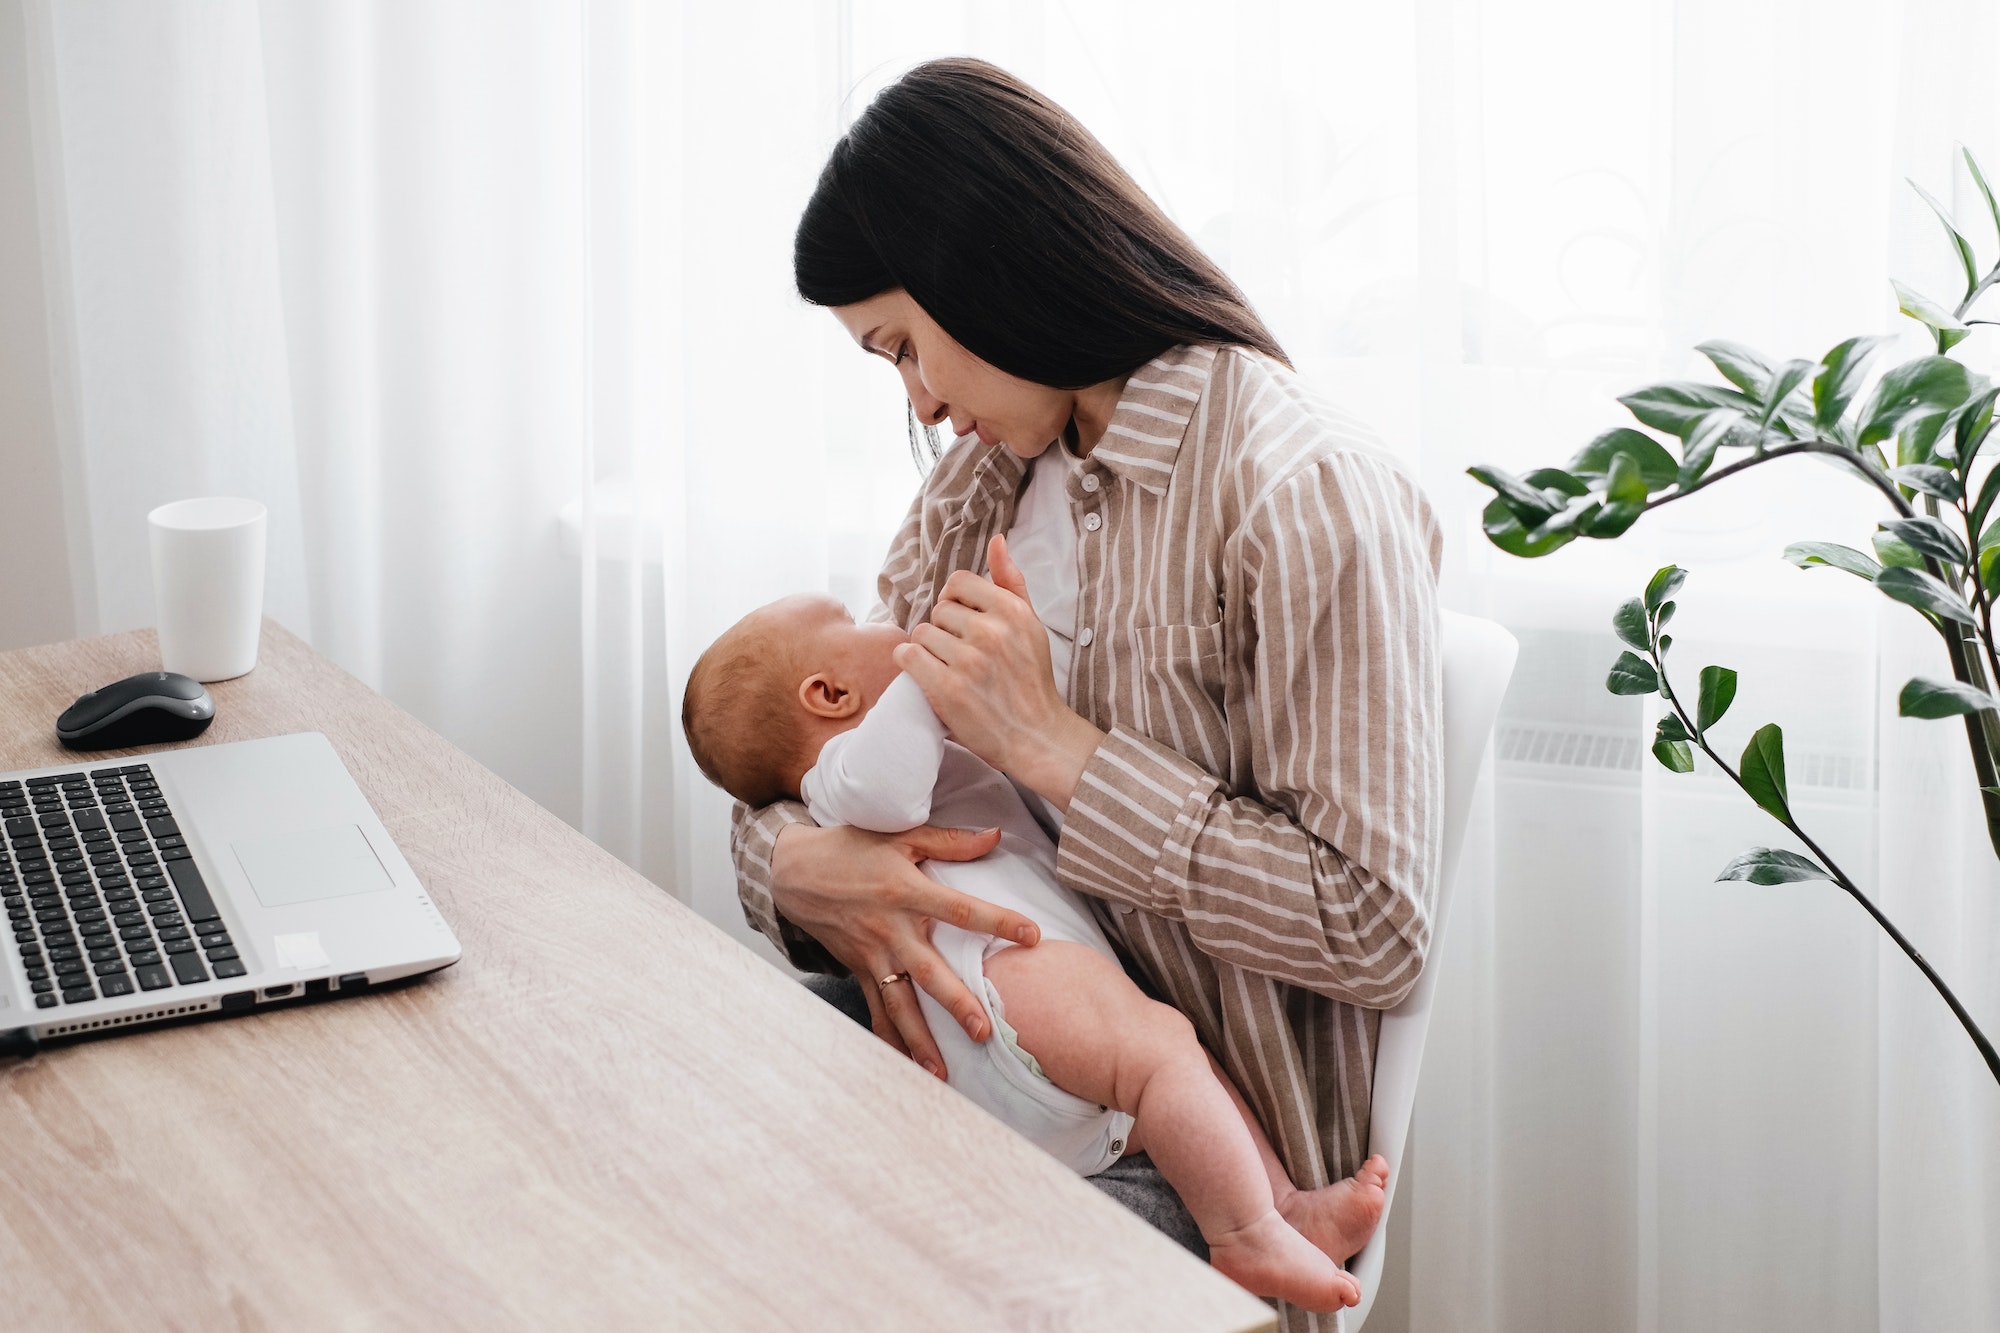 Mother by laptop - a call for breastfeeding support in workplaces